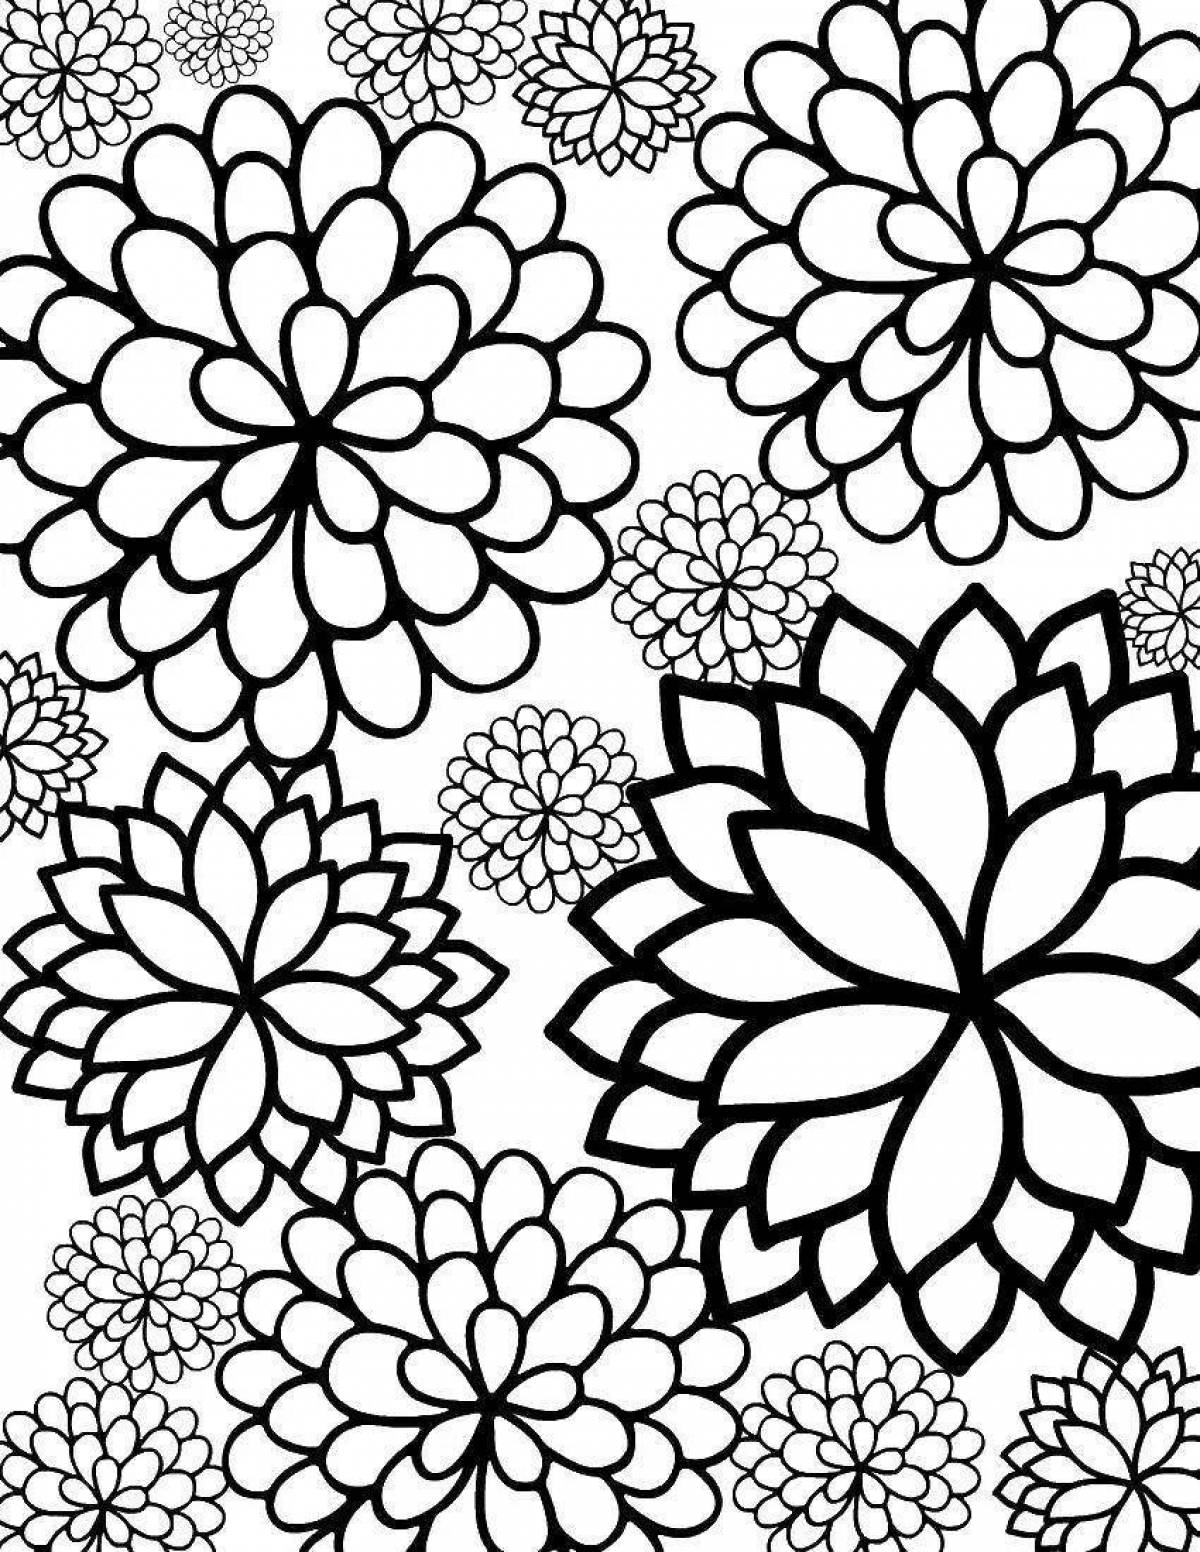 Fancy patterns and ornaments for coloring for children